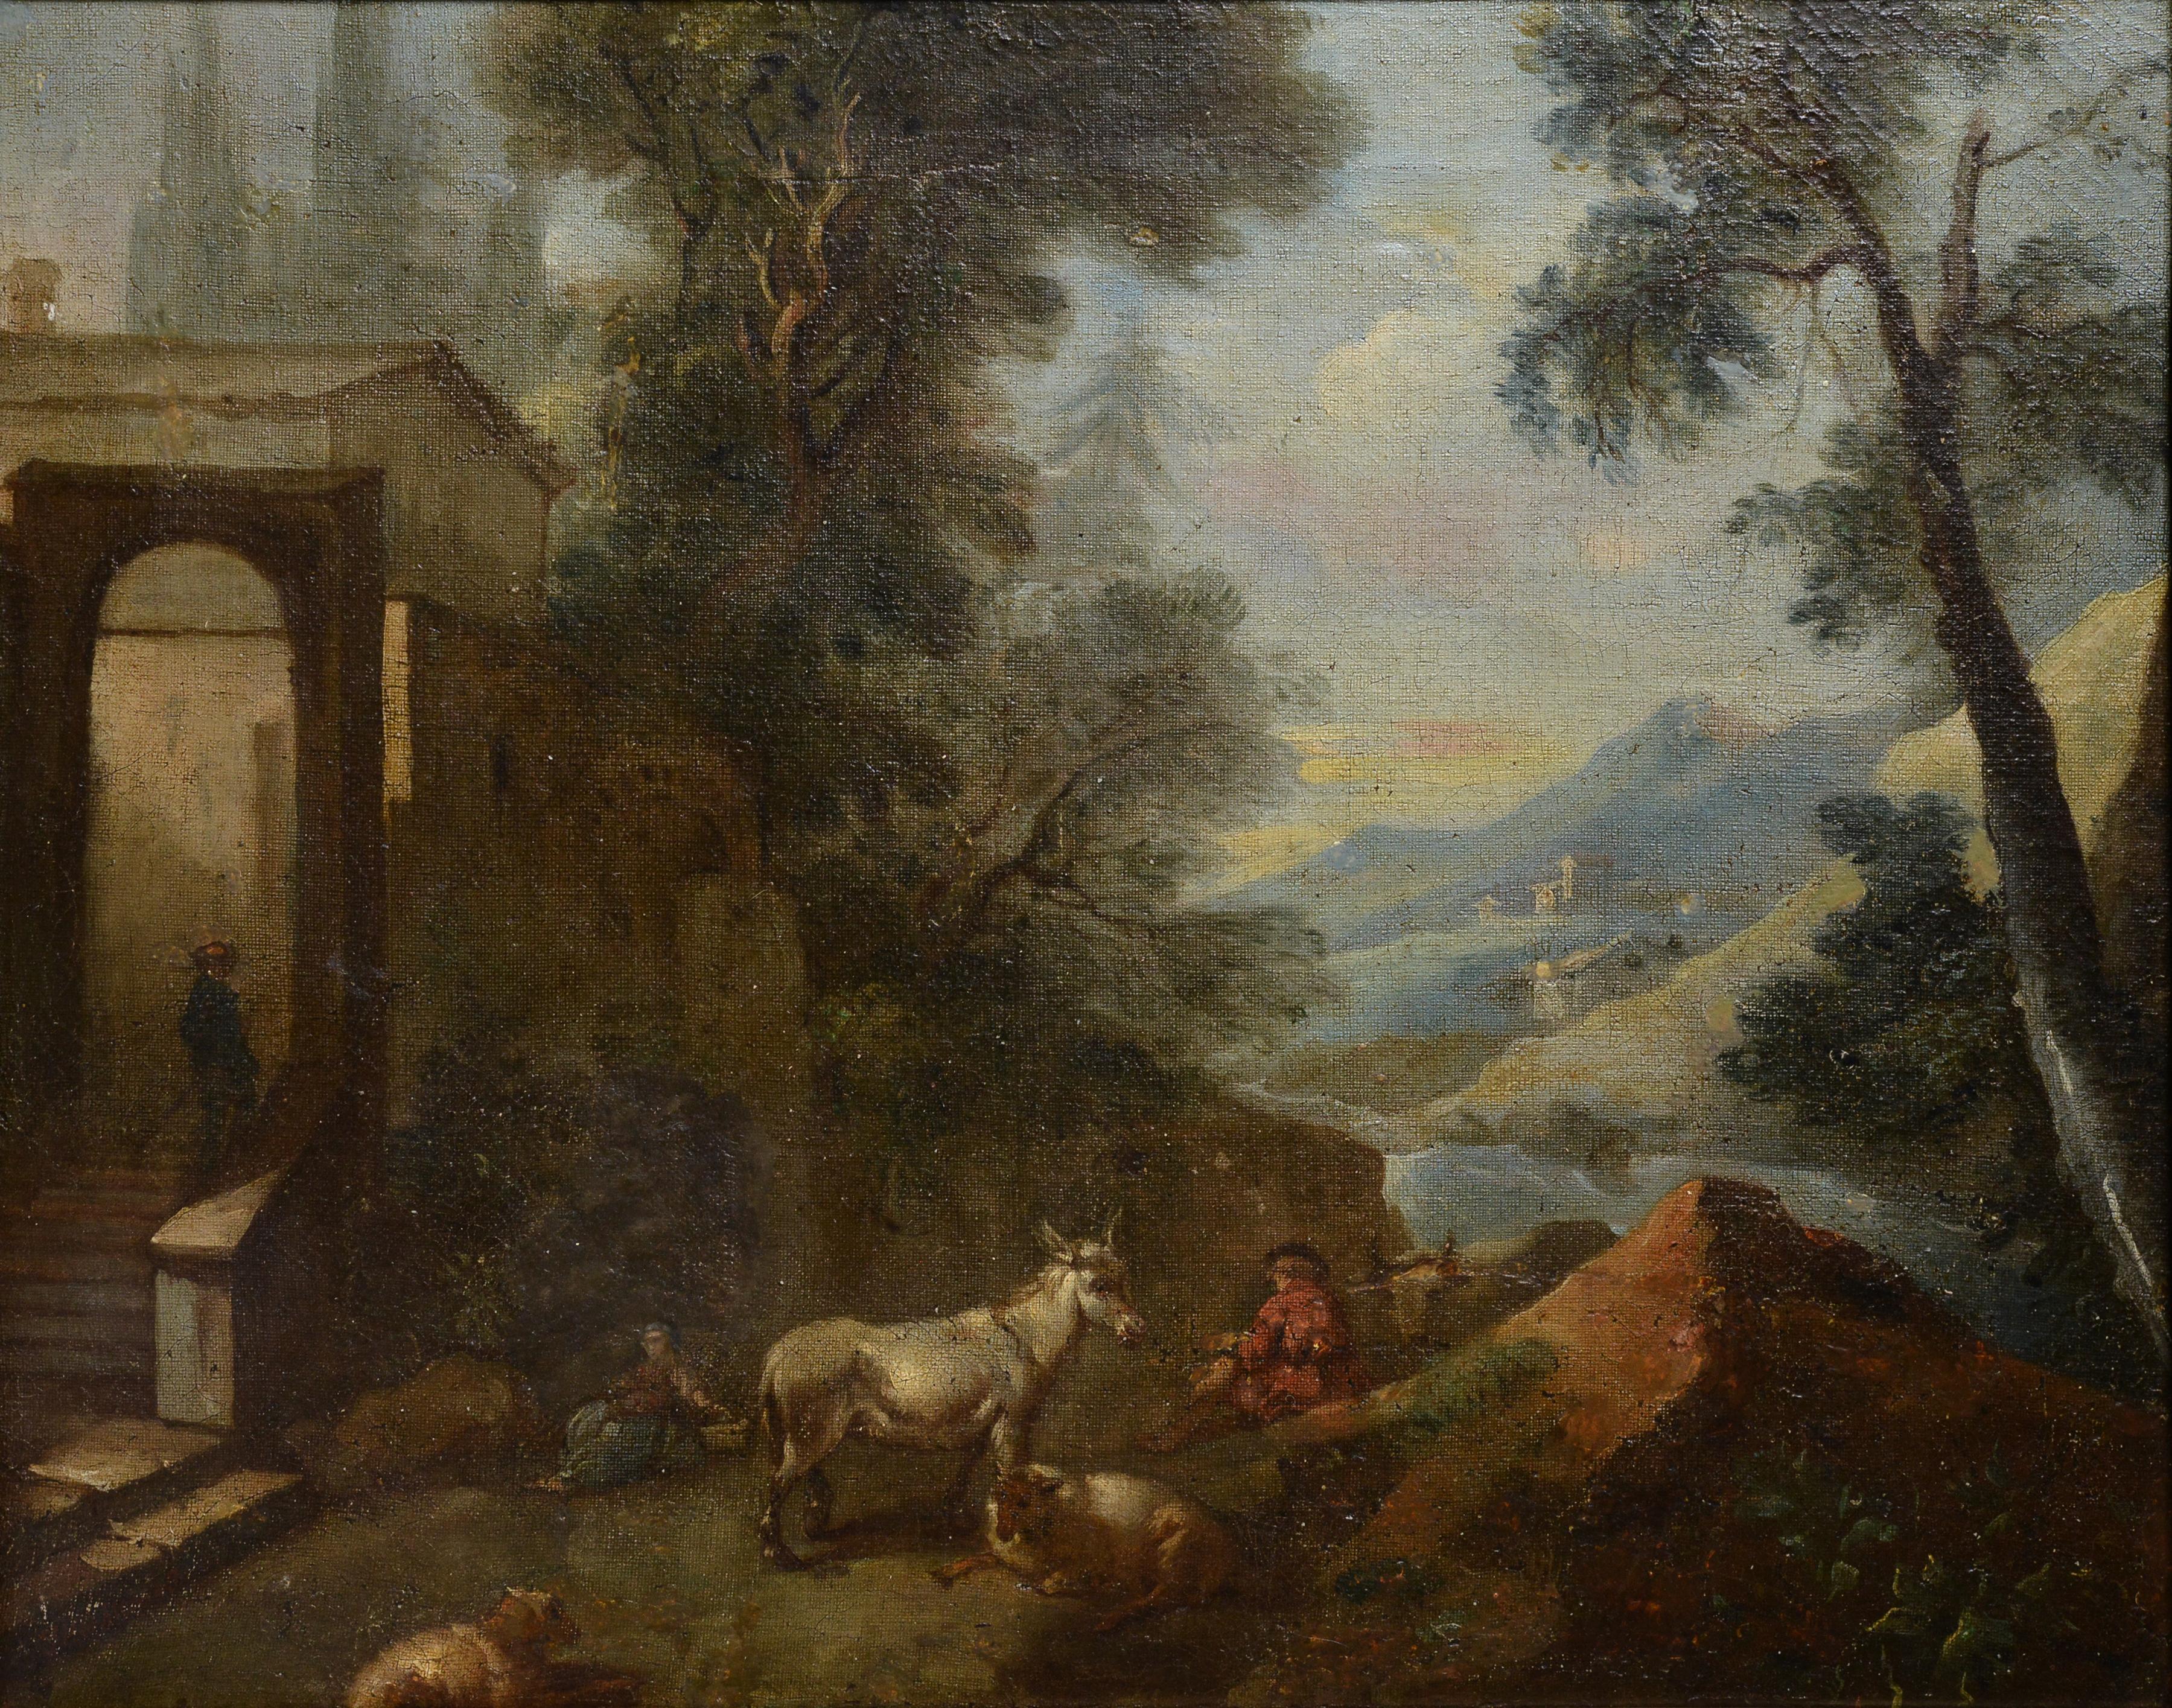 Attributed to Dutch artist, youngest Jan Van der Meer (1656-1705) or his circle. Pastoral scene with little livestock and figures of reclining shepherds by town walls, castle or cathedral in background, distant houses and hazed valley -  It is a